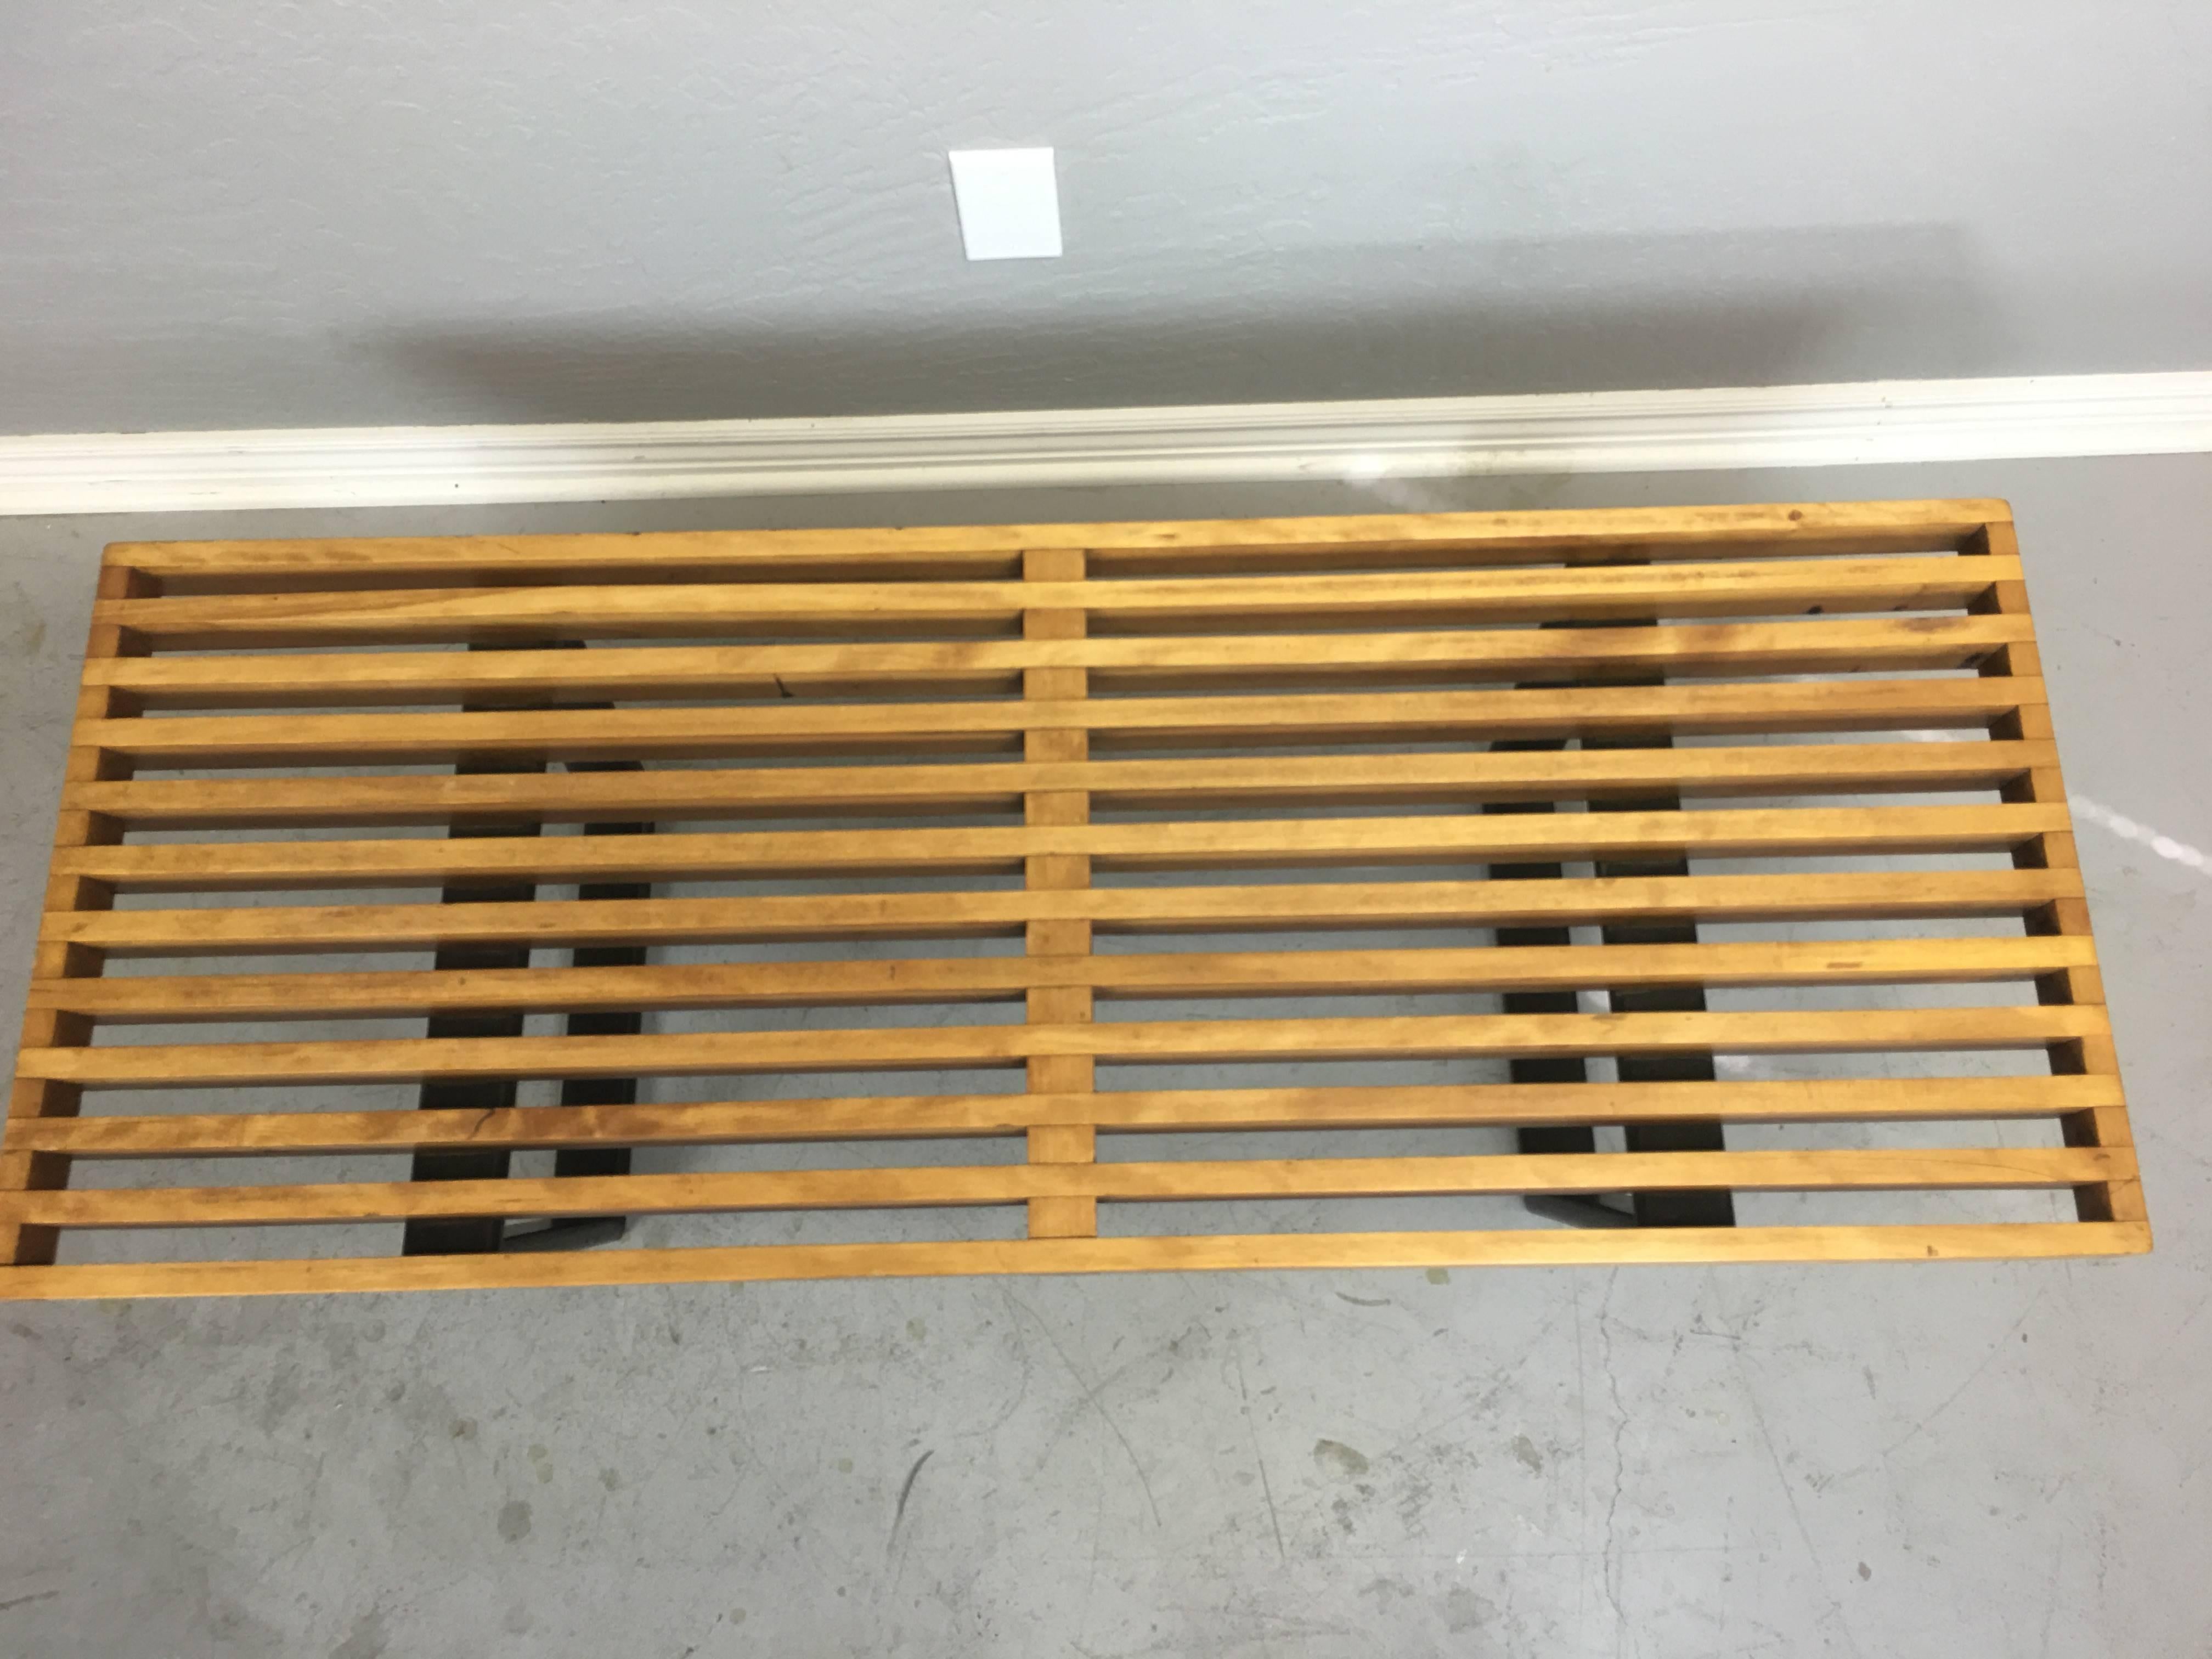 George Nelson wood slatted bench/coffee table for Herman Miller, circa 1960. No makers mark. It measures 18 3/4" wide x 48" long x 14" high. Vintage condition with nice aged patina. Has not been restored due to how attractive it is